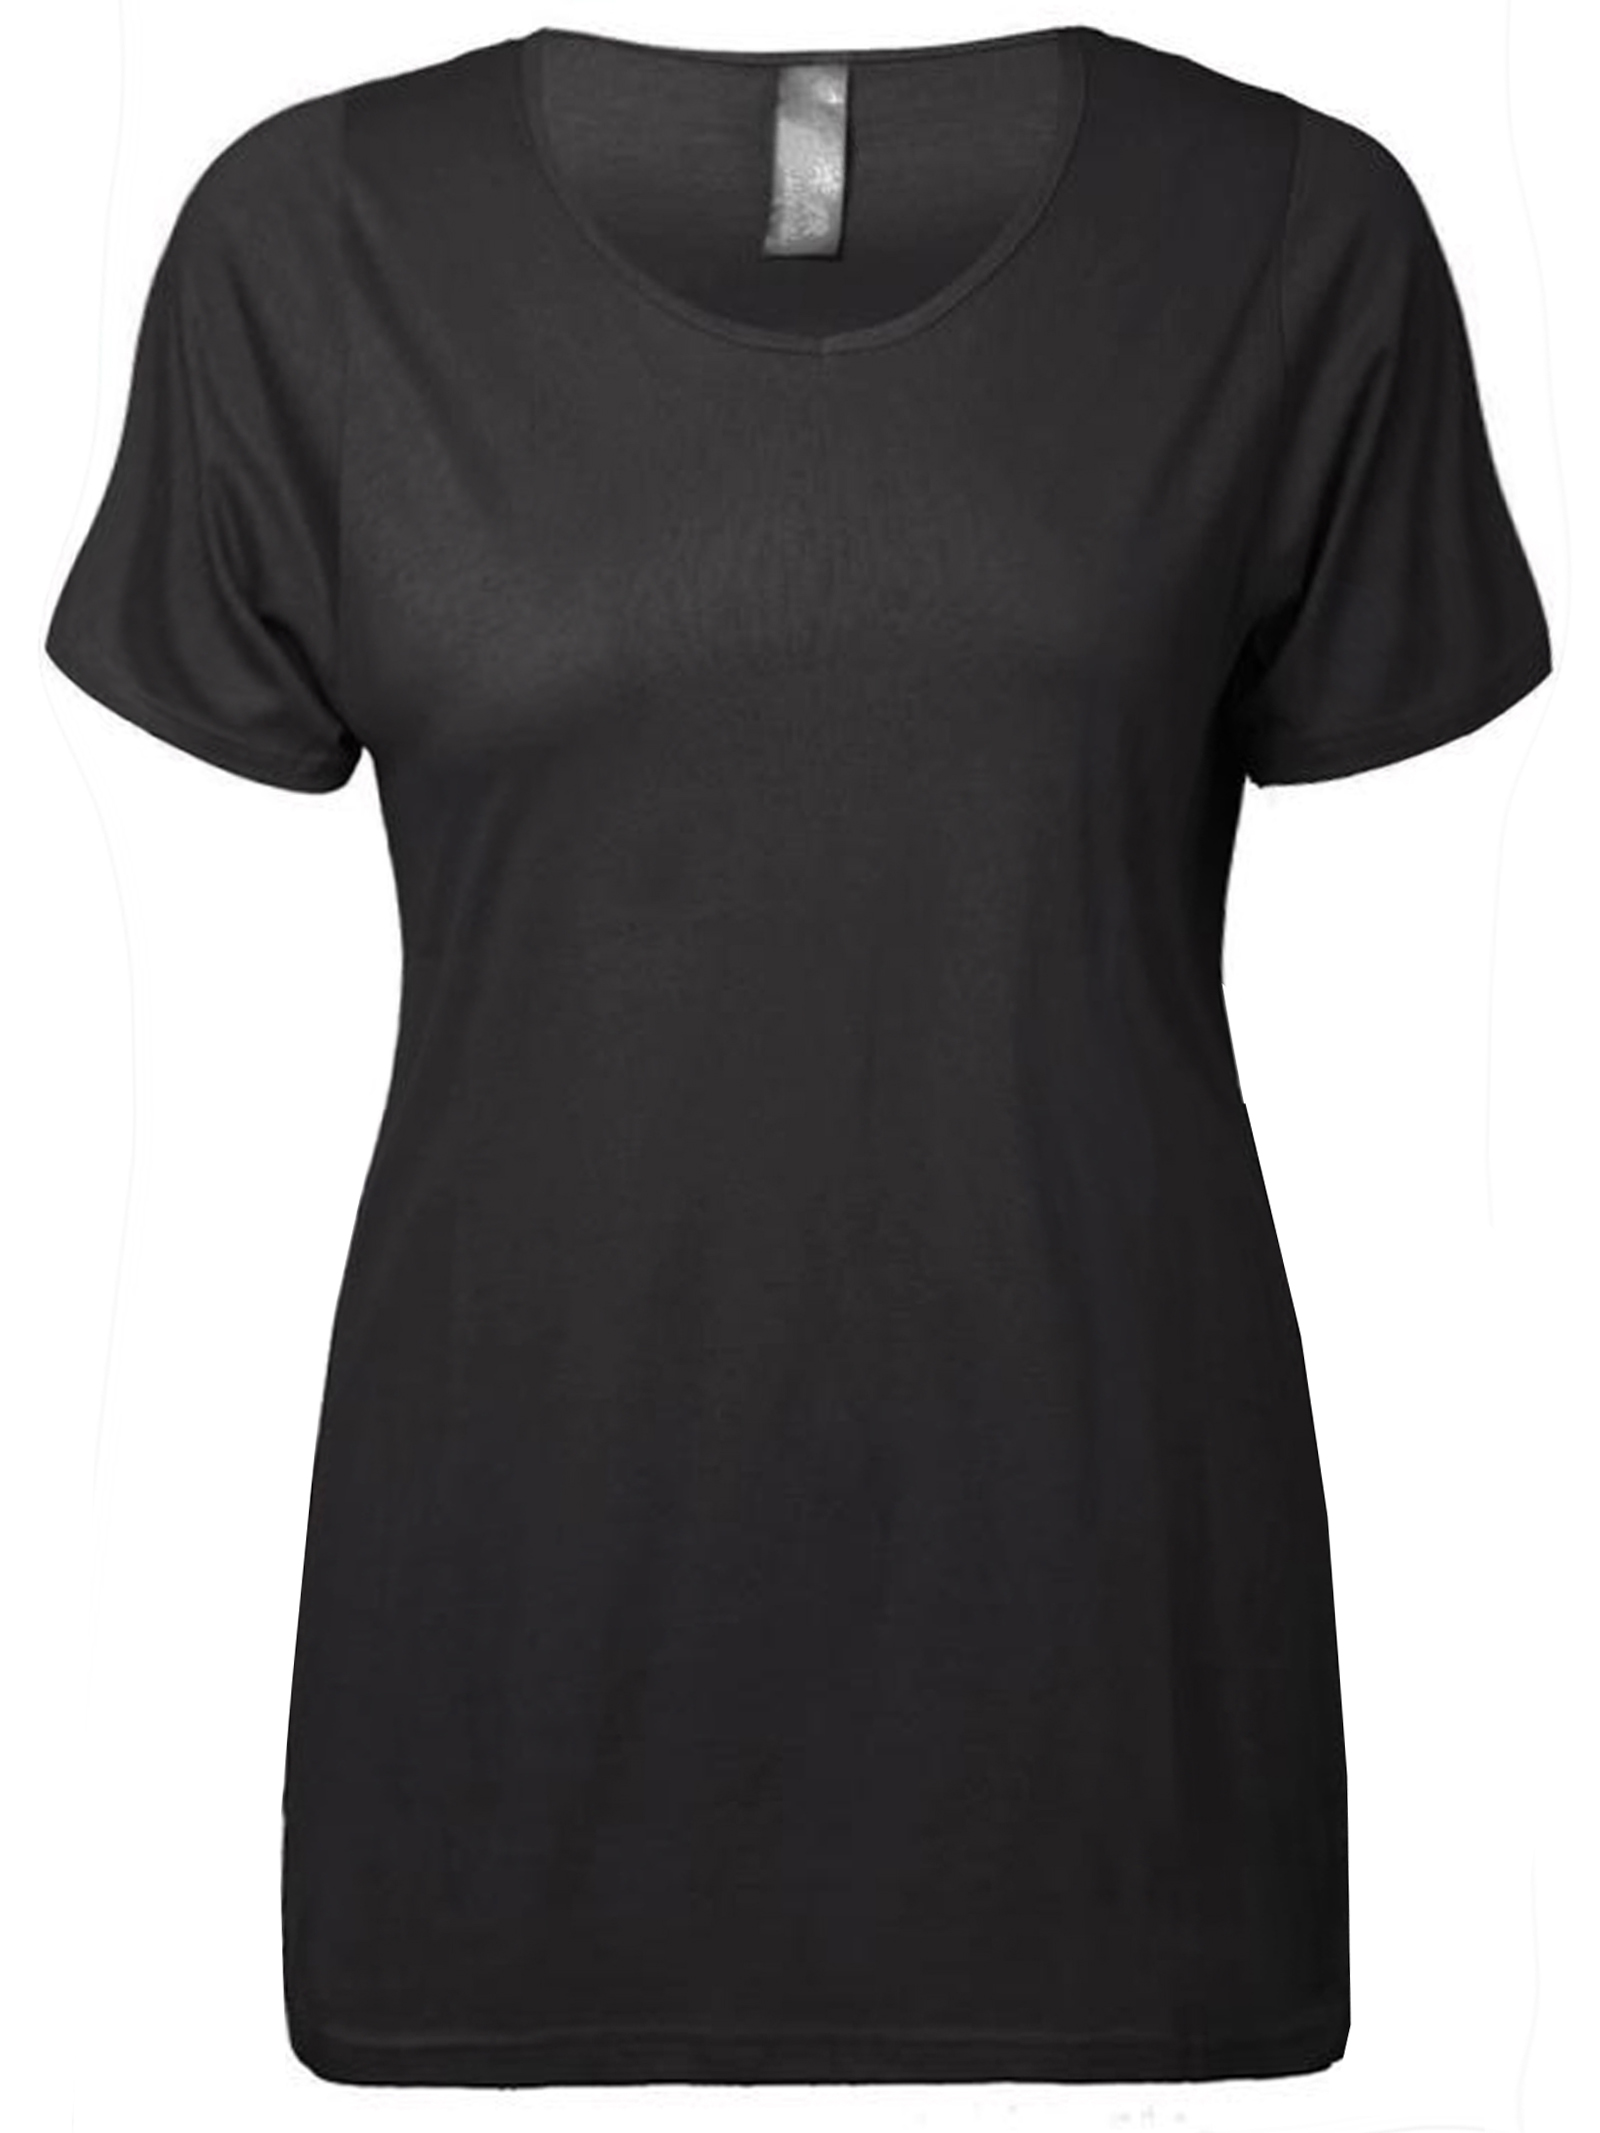 CURVE - - Yours BLACK Short Sleeve Scoop Neck T-Shirt - Plus Size 16 to ...